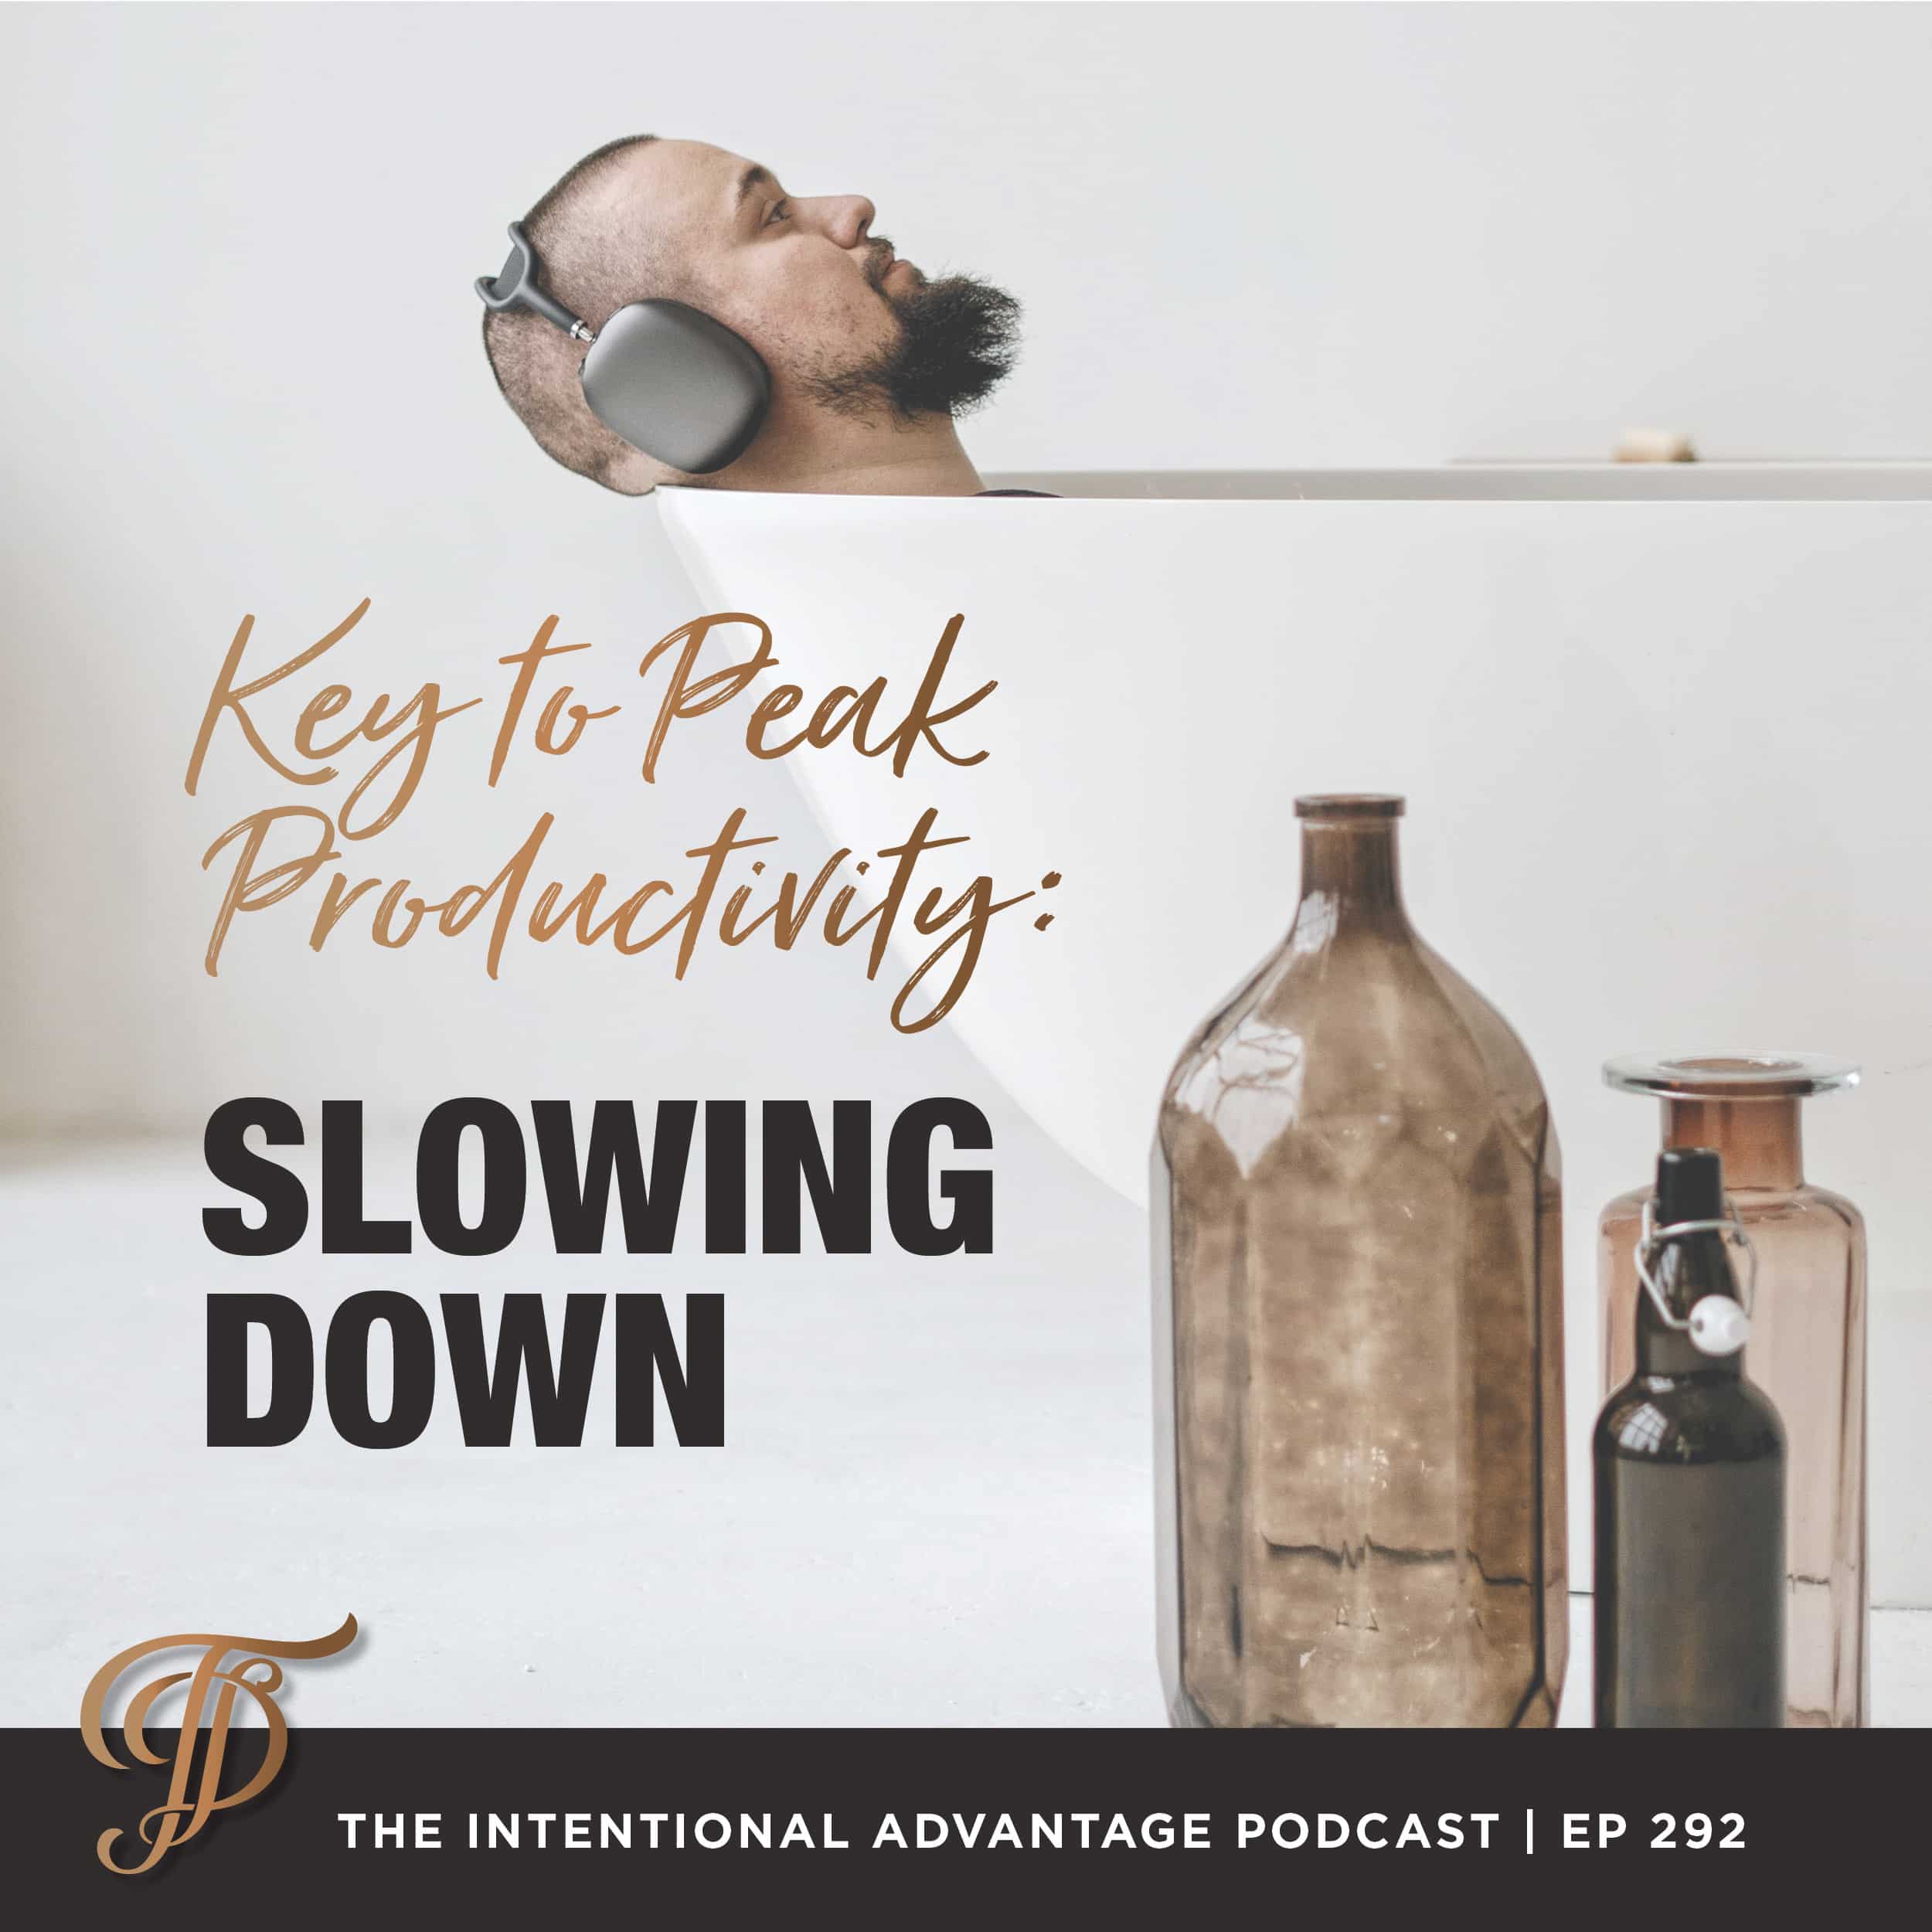 The Key To Peak Productivity: Slowing Down